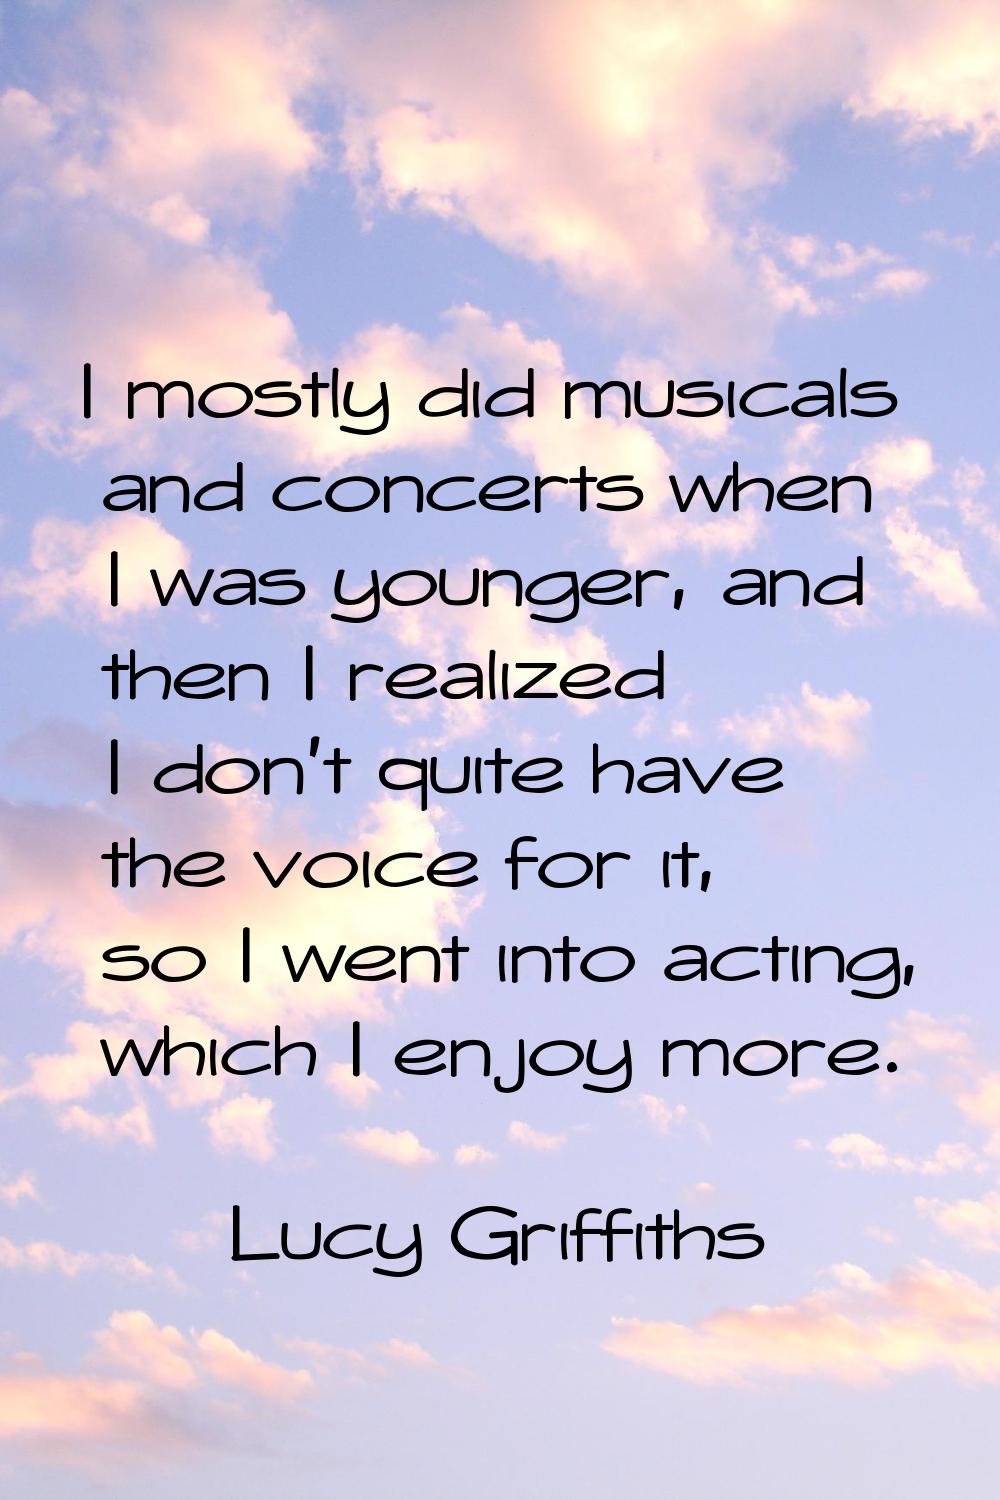 I mostly did musicals and concerts when I was younger, and then I realized I don't quite have the v